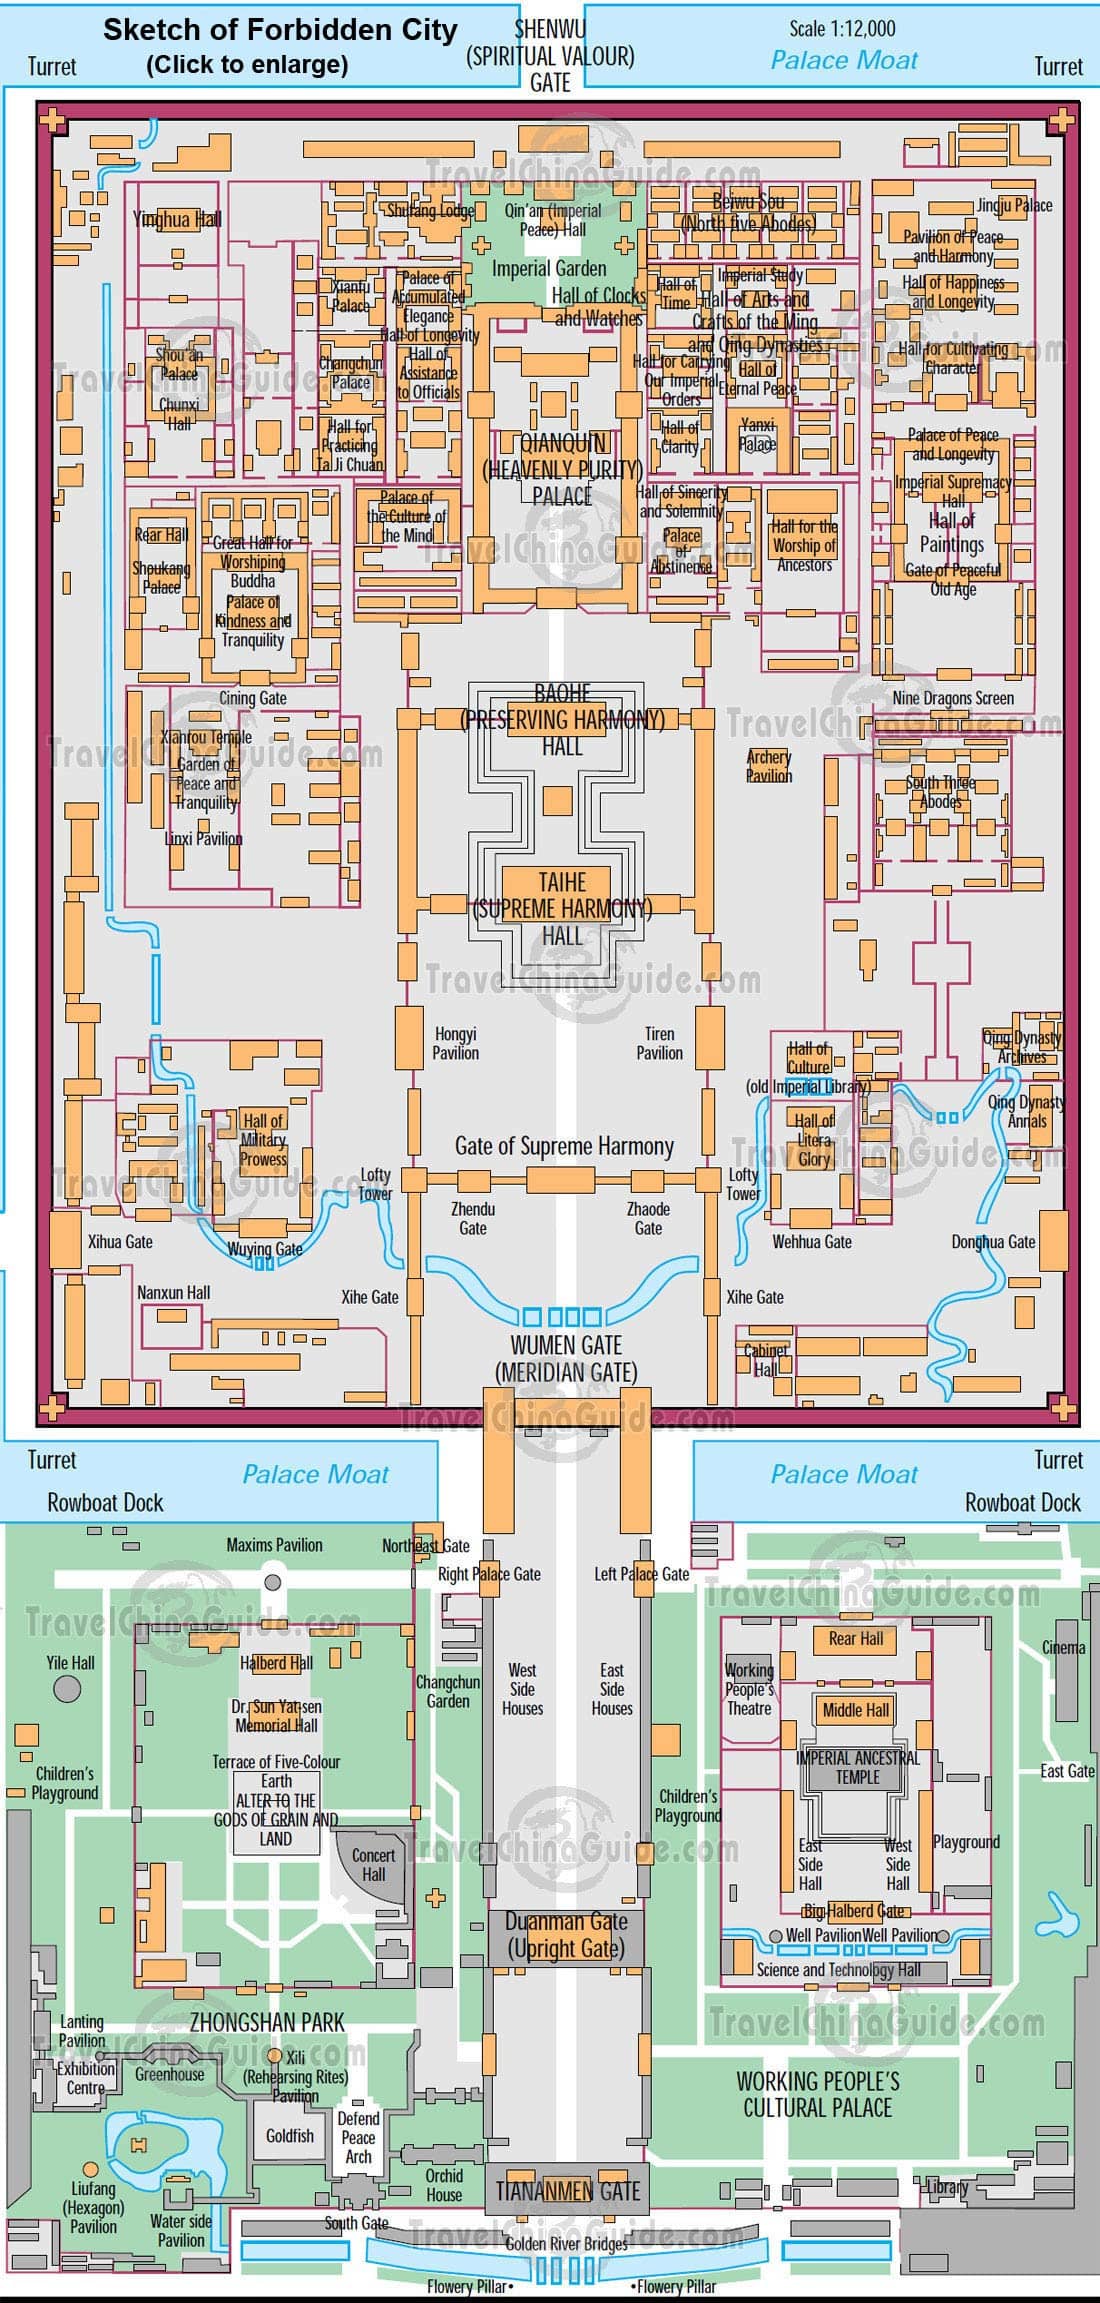 Forbidden City Maps, Location, PDF Tourist Map of Palace Museum